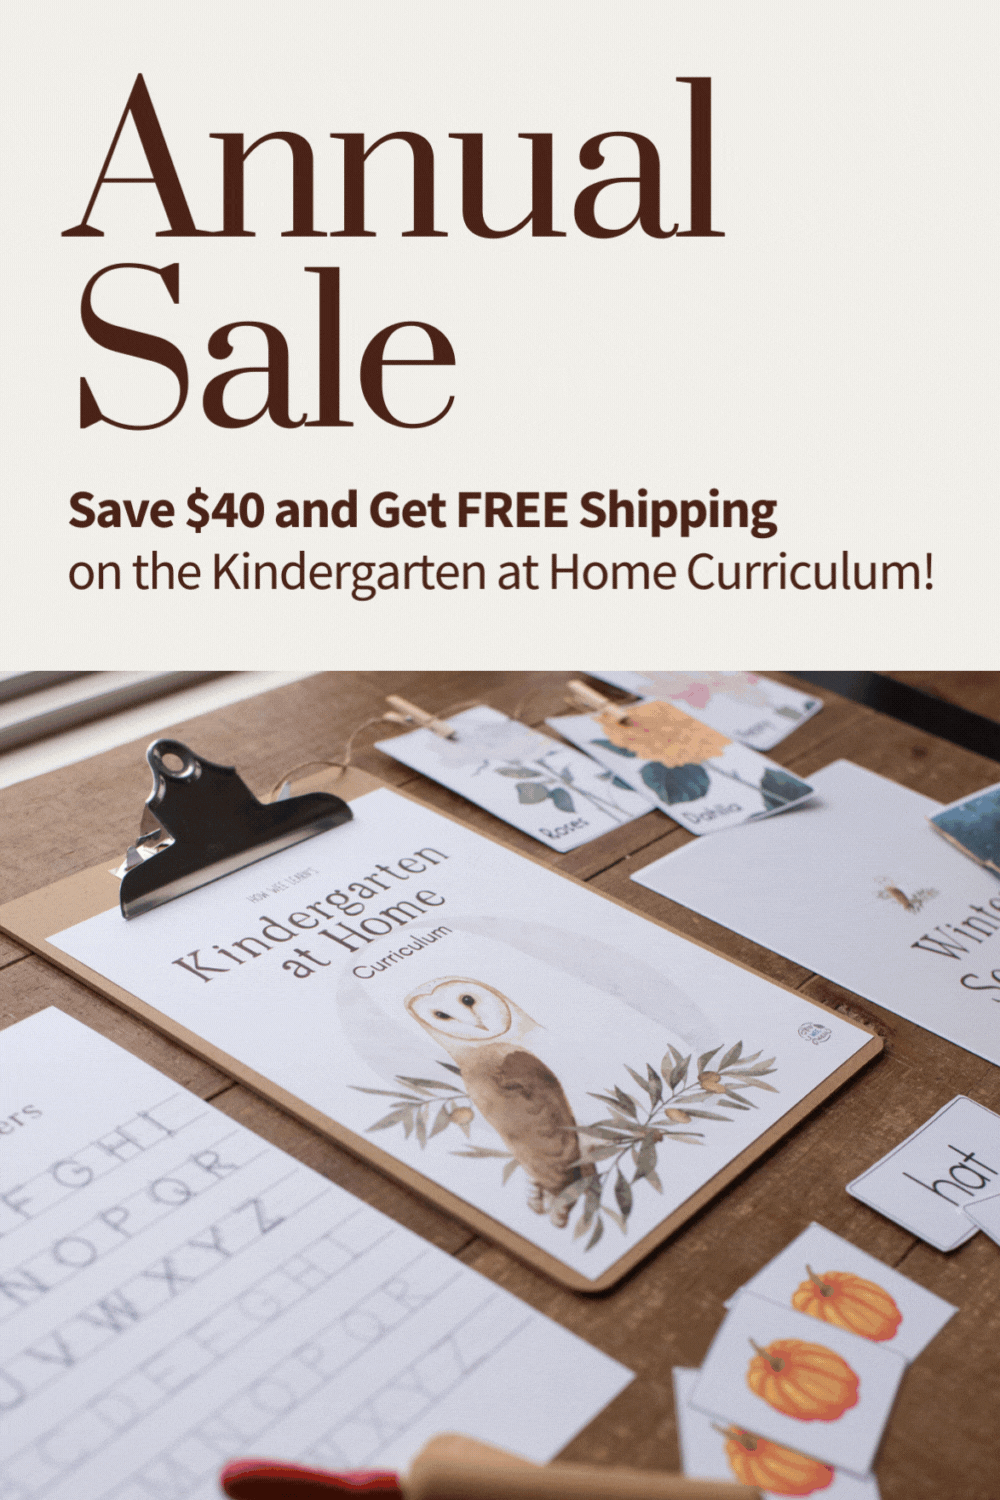 Annual Sale Save $40 and Get FREE Shipping on the Kindergarten at Home Curriculum!